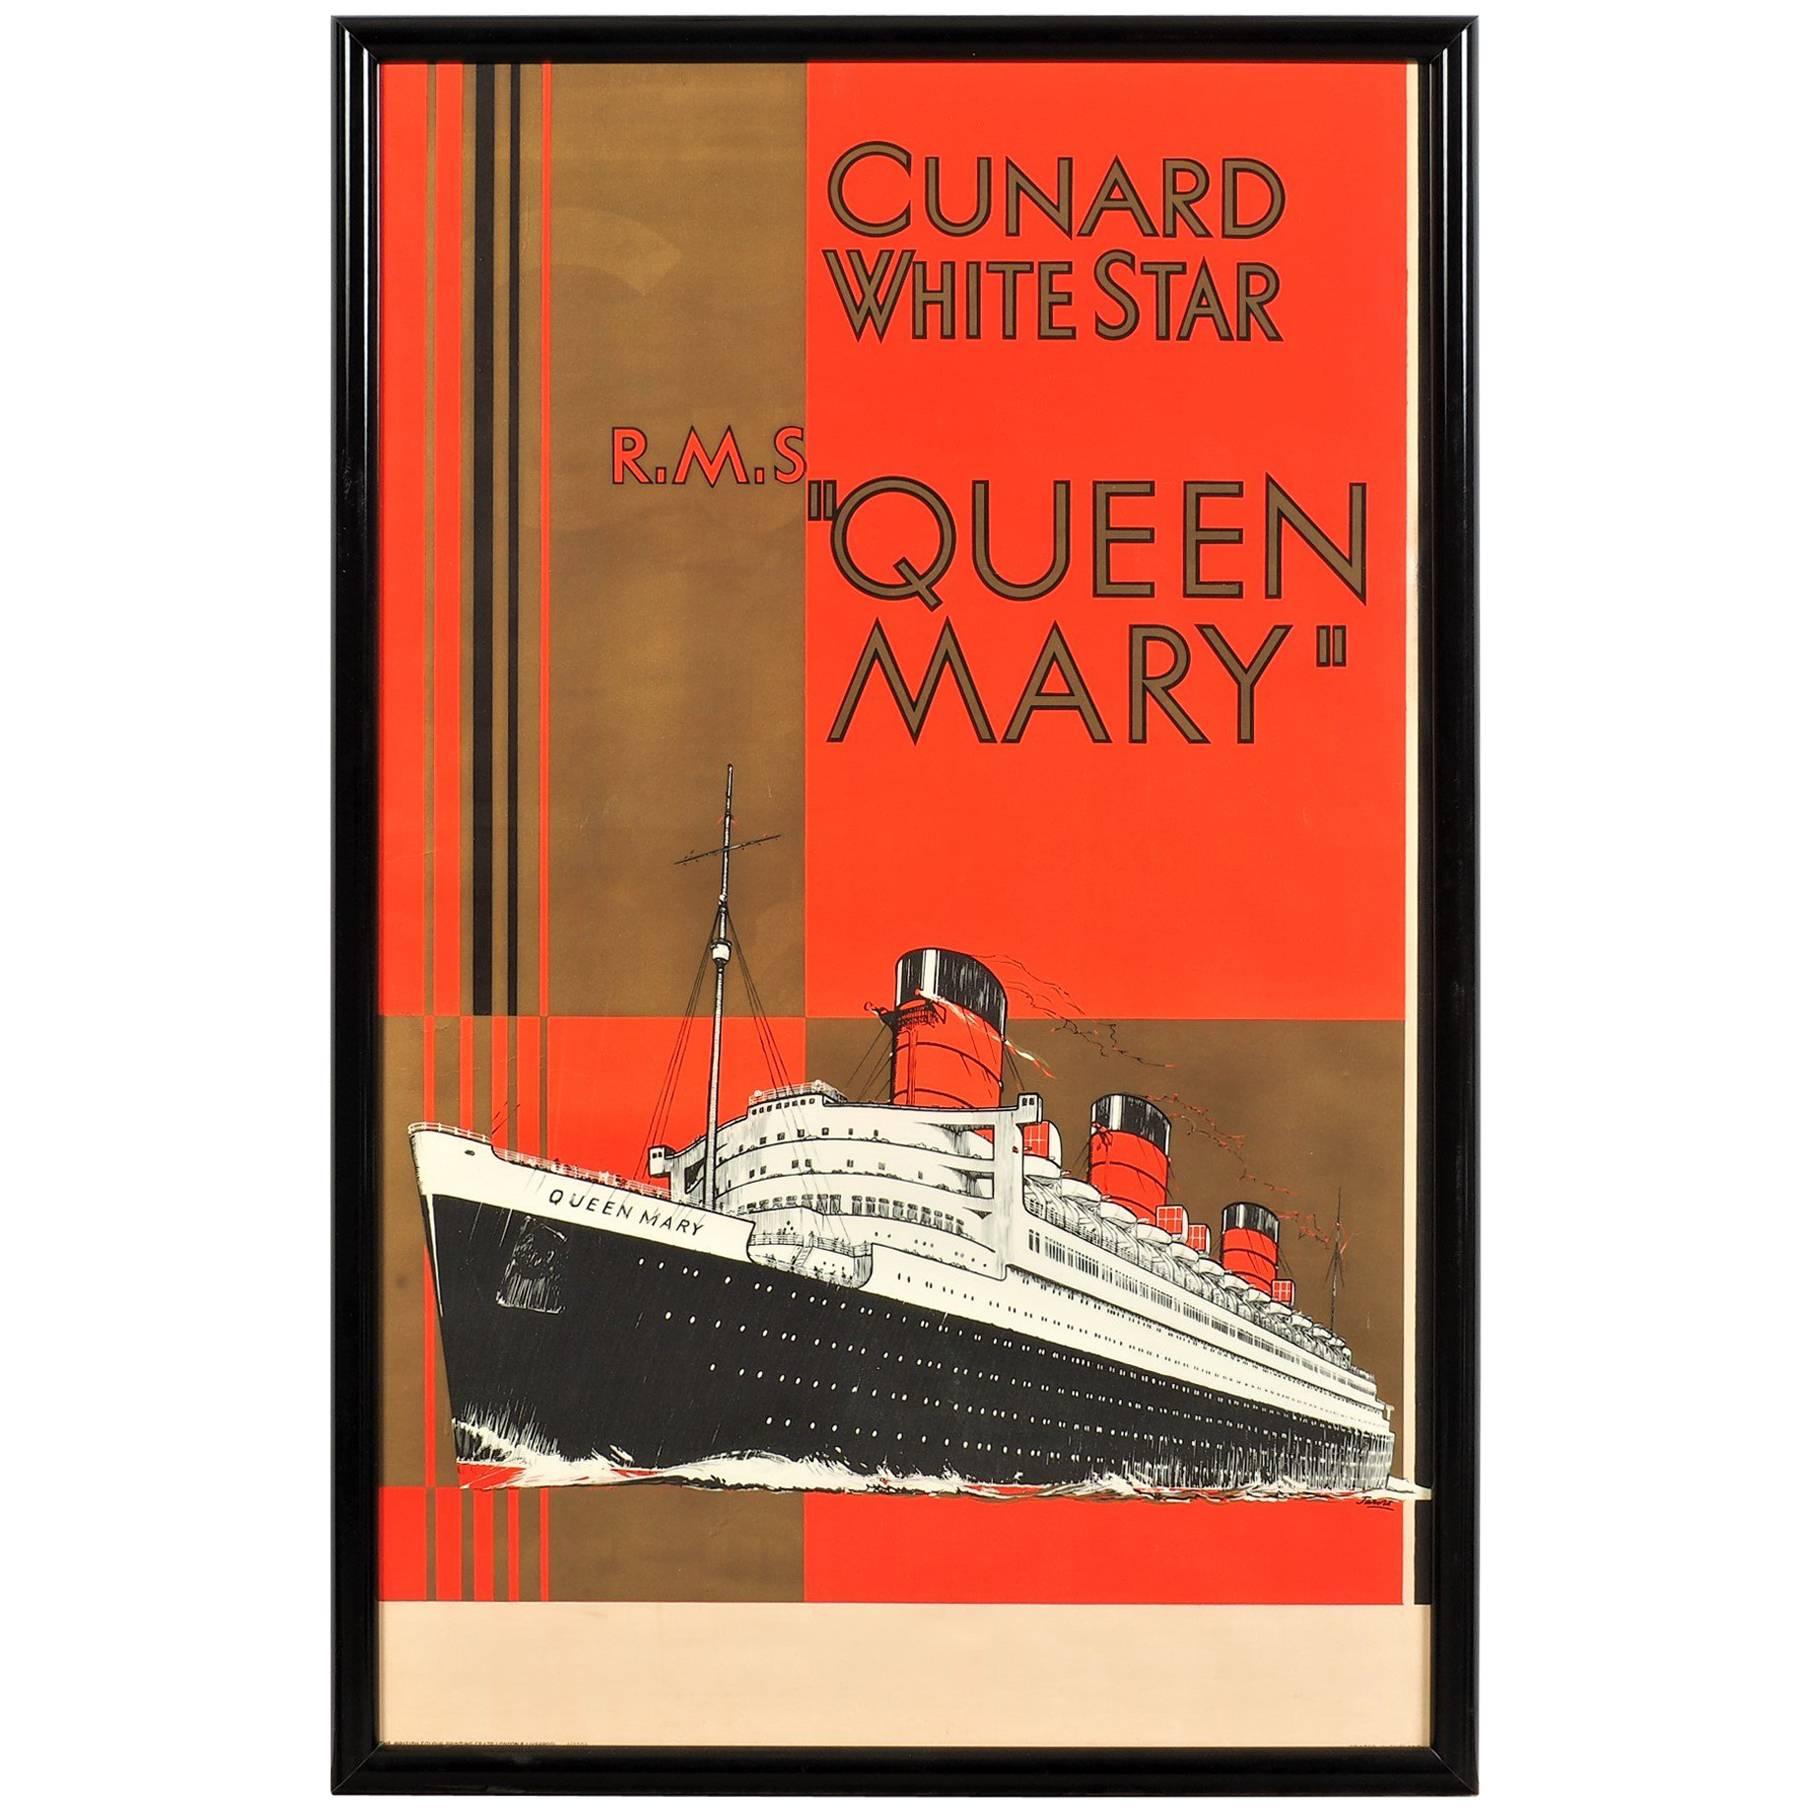 RMS Queen Mary Cunard White Star 1936 Vintage Style Travel Poster 24x36